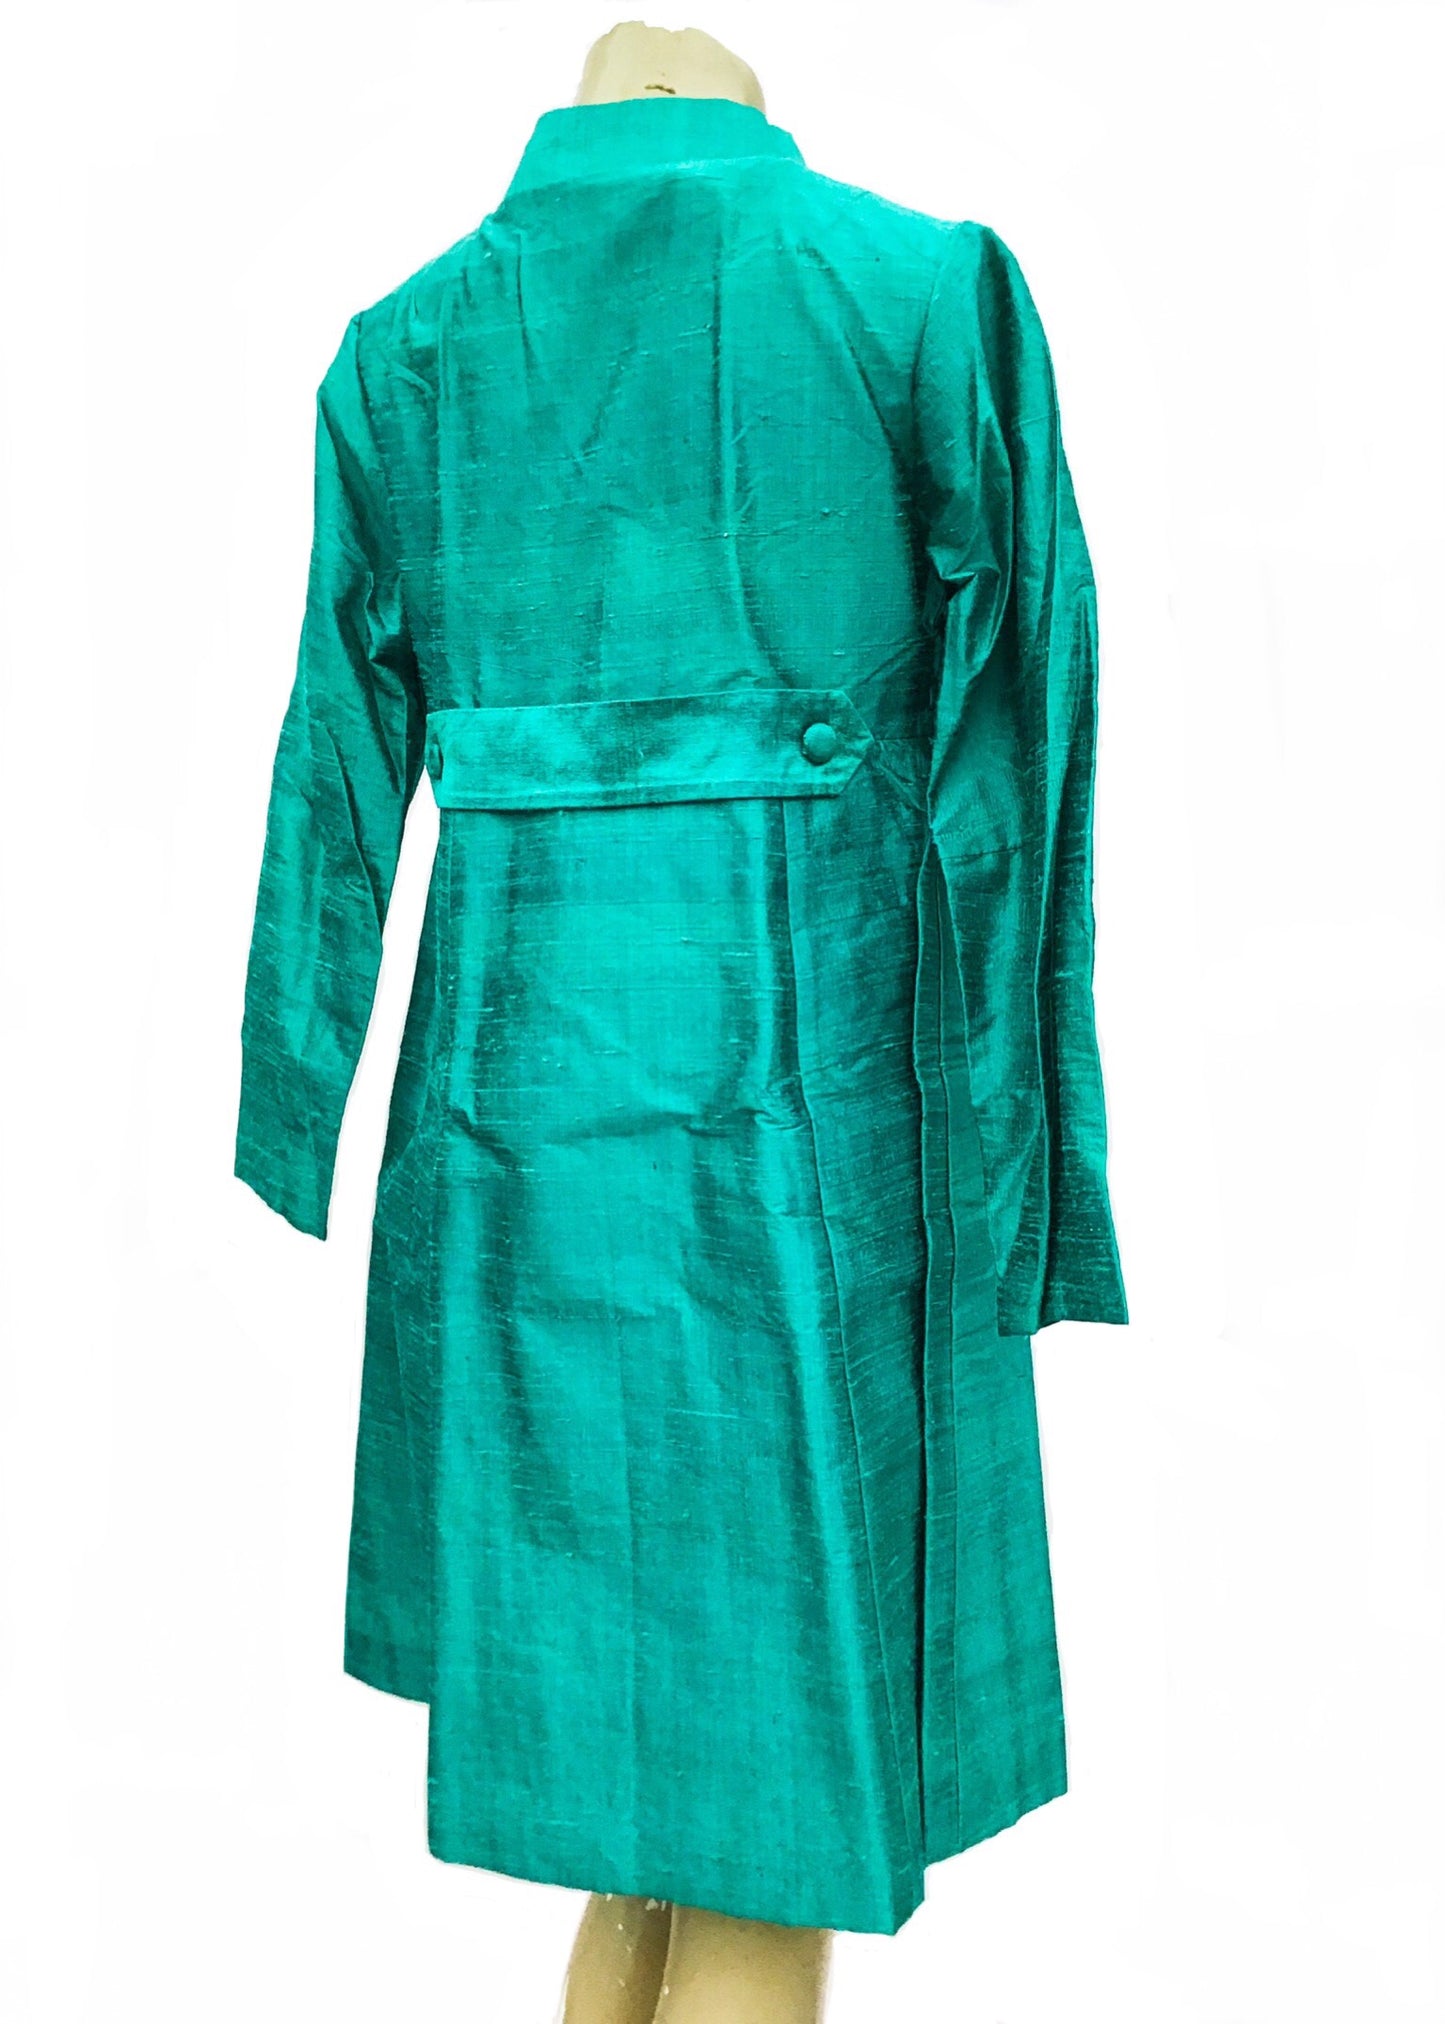 1960s Vintage Turquoise Shangtung Raw Silk Cocktail Coat